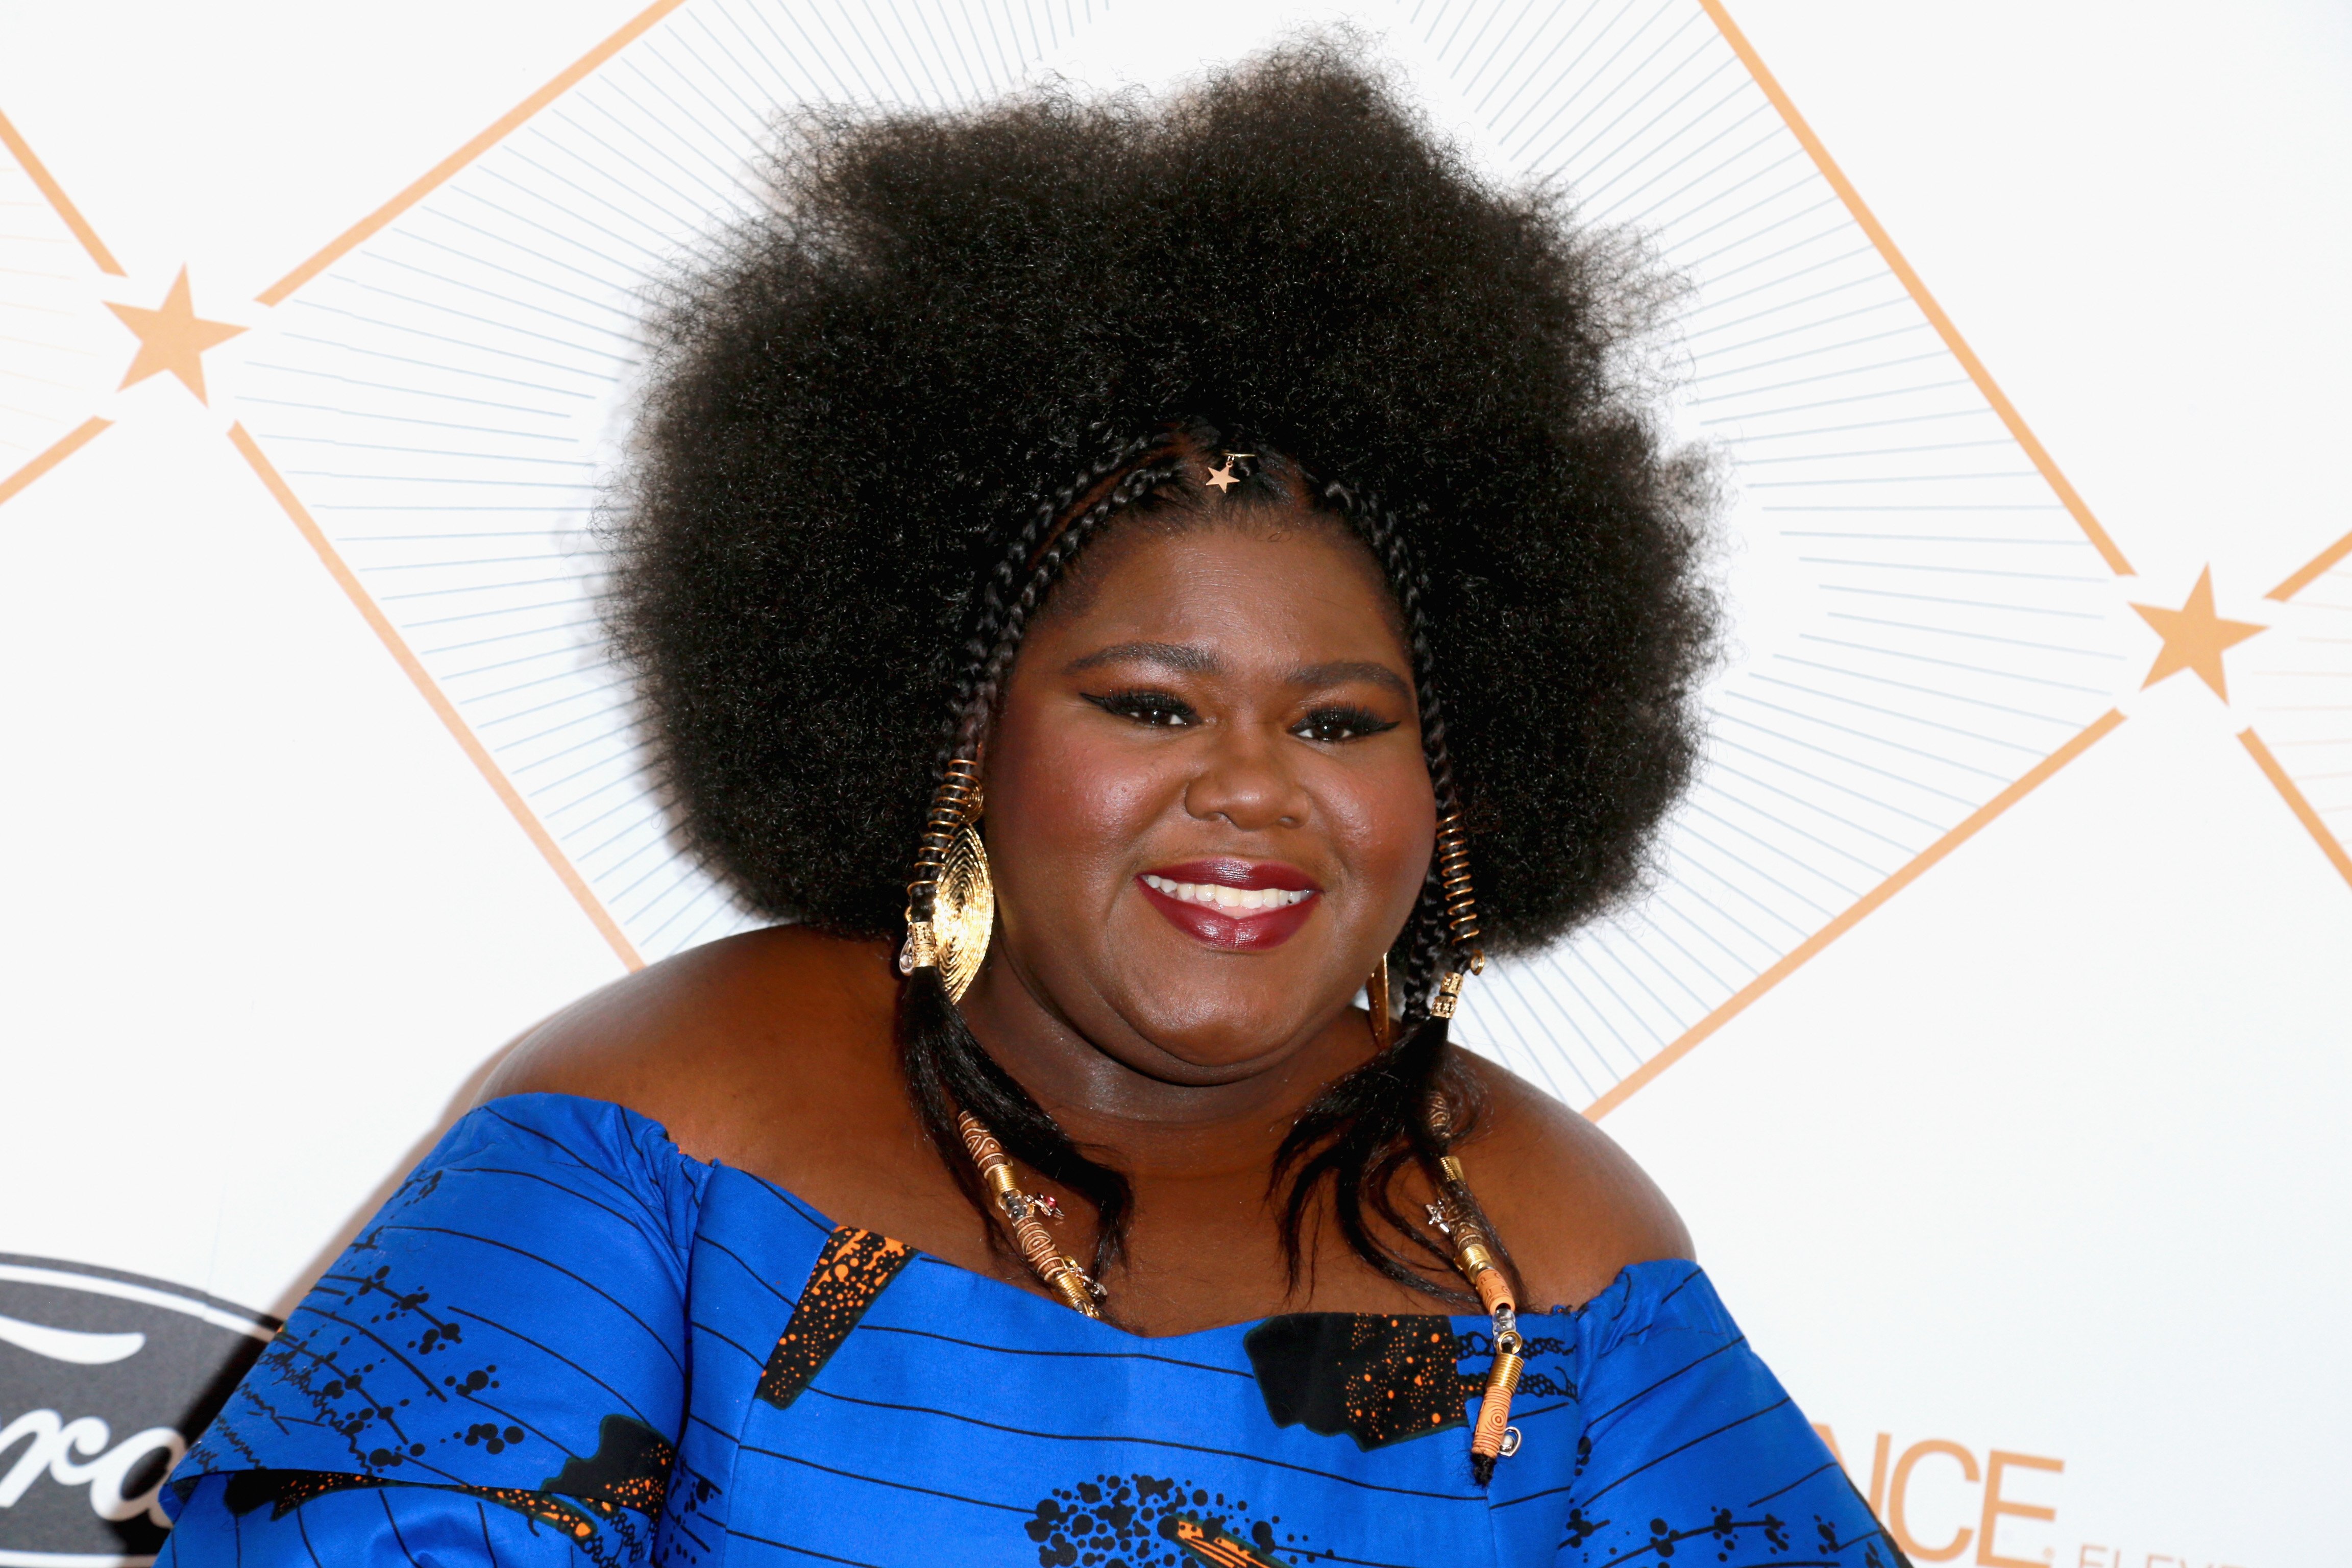 Gabourey Sidibe at the 2018 Essence Black Women In Hollywood Oscars Luncheon on Mar. 1, 2018 in California. | Photo: Getty Images